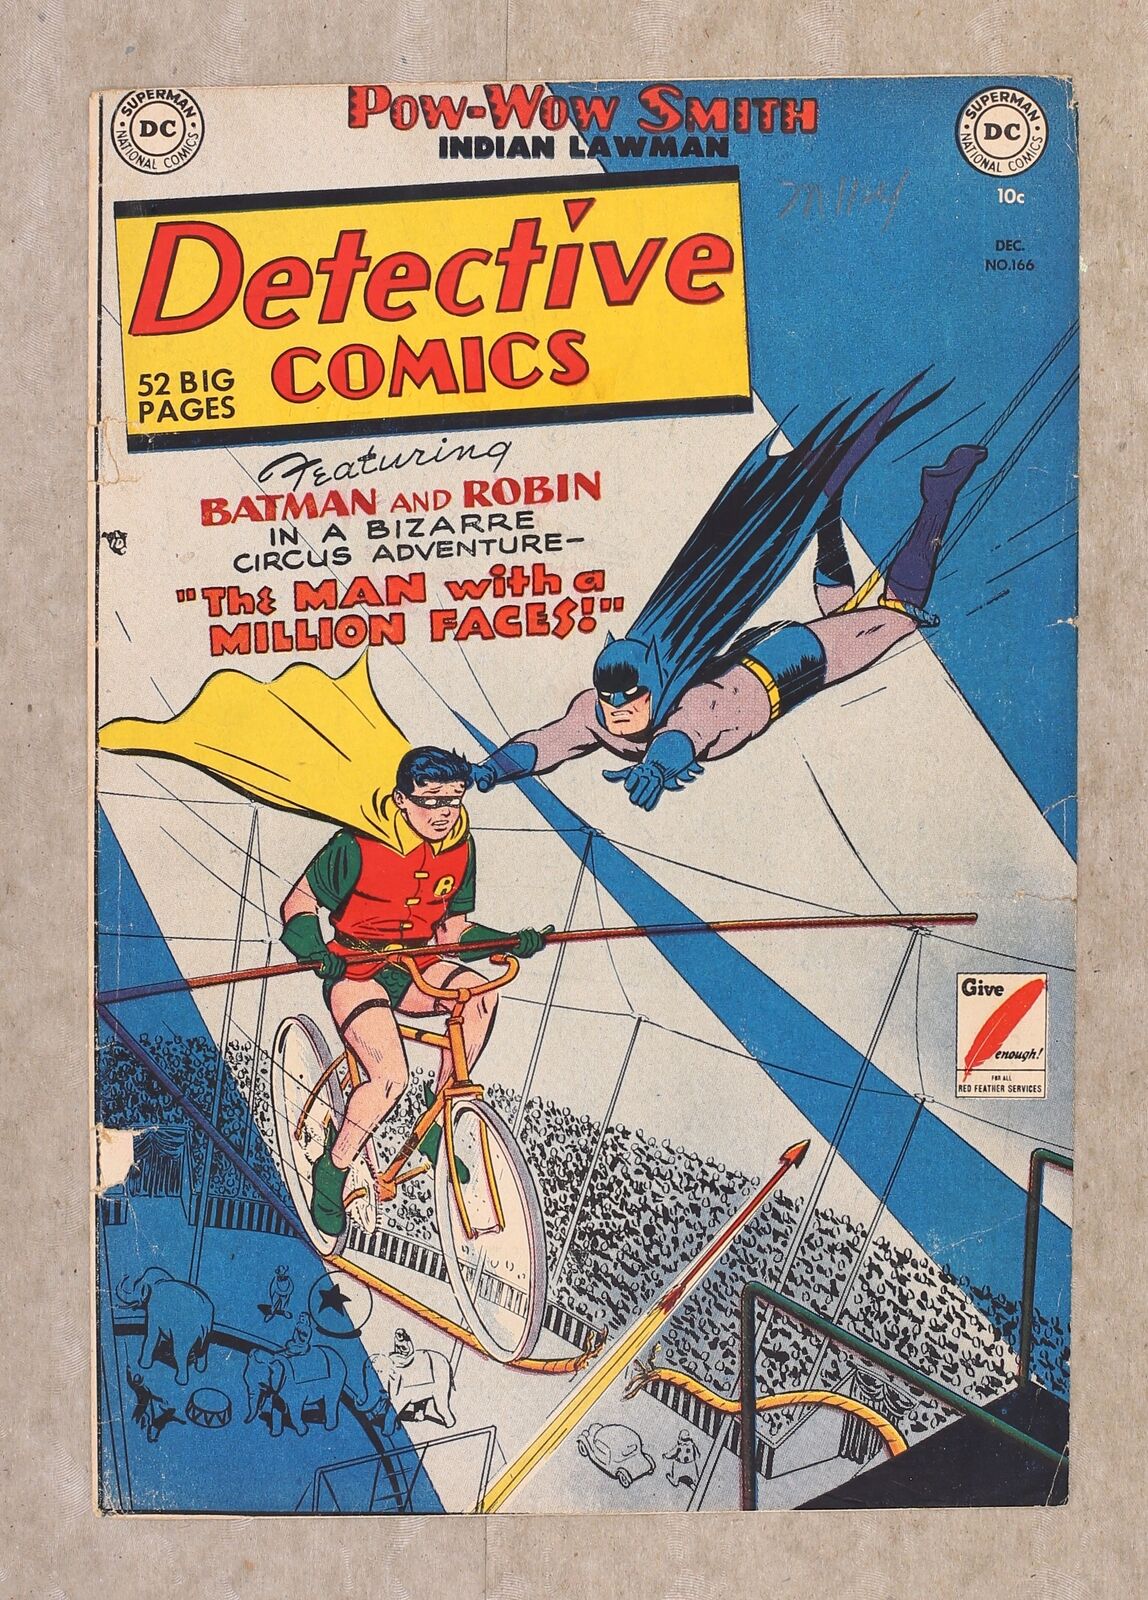 Detective Comics #166 Front and Back Cover Only